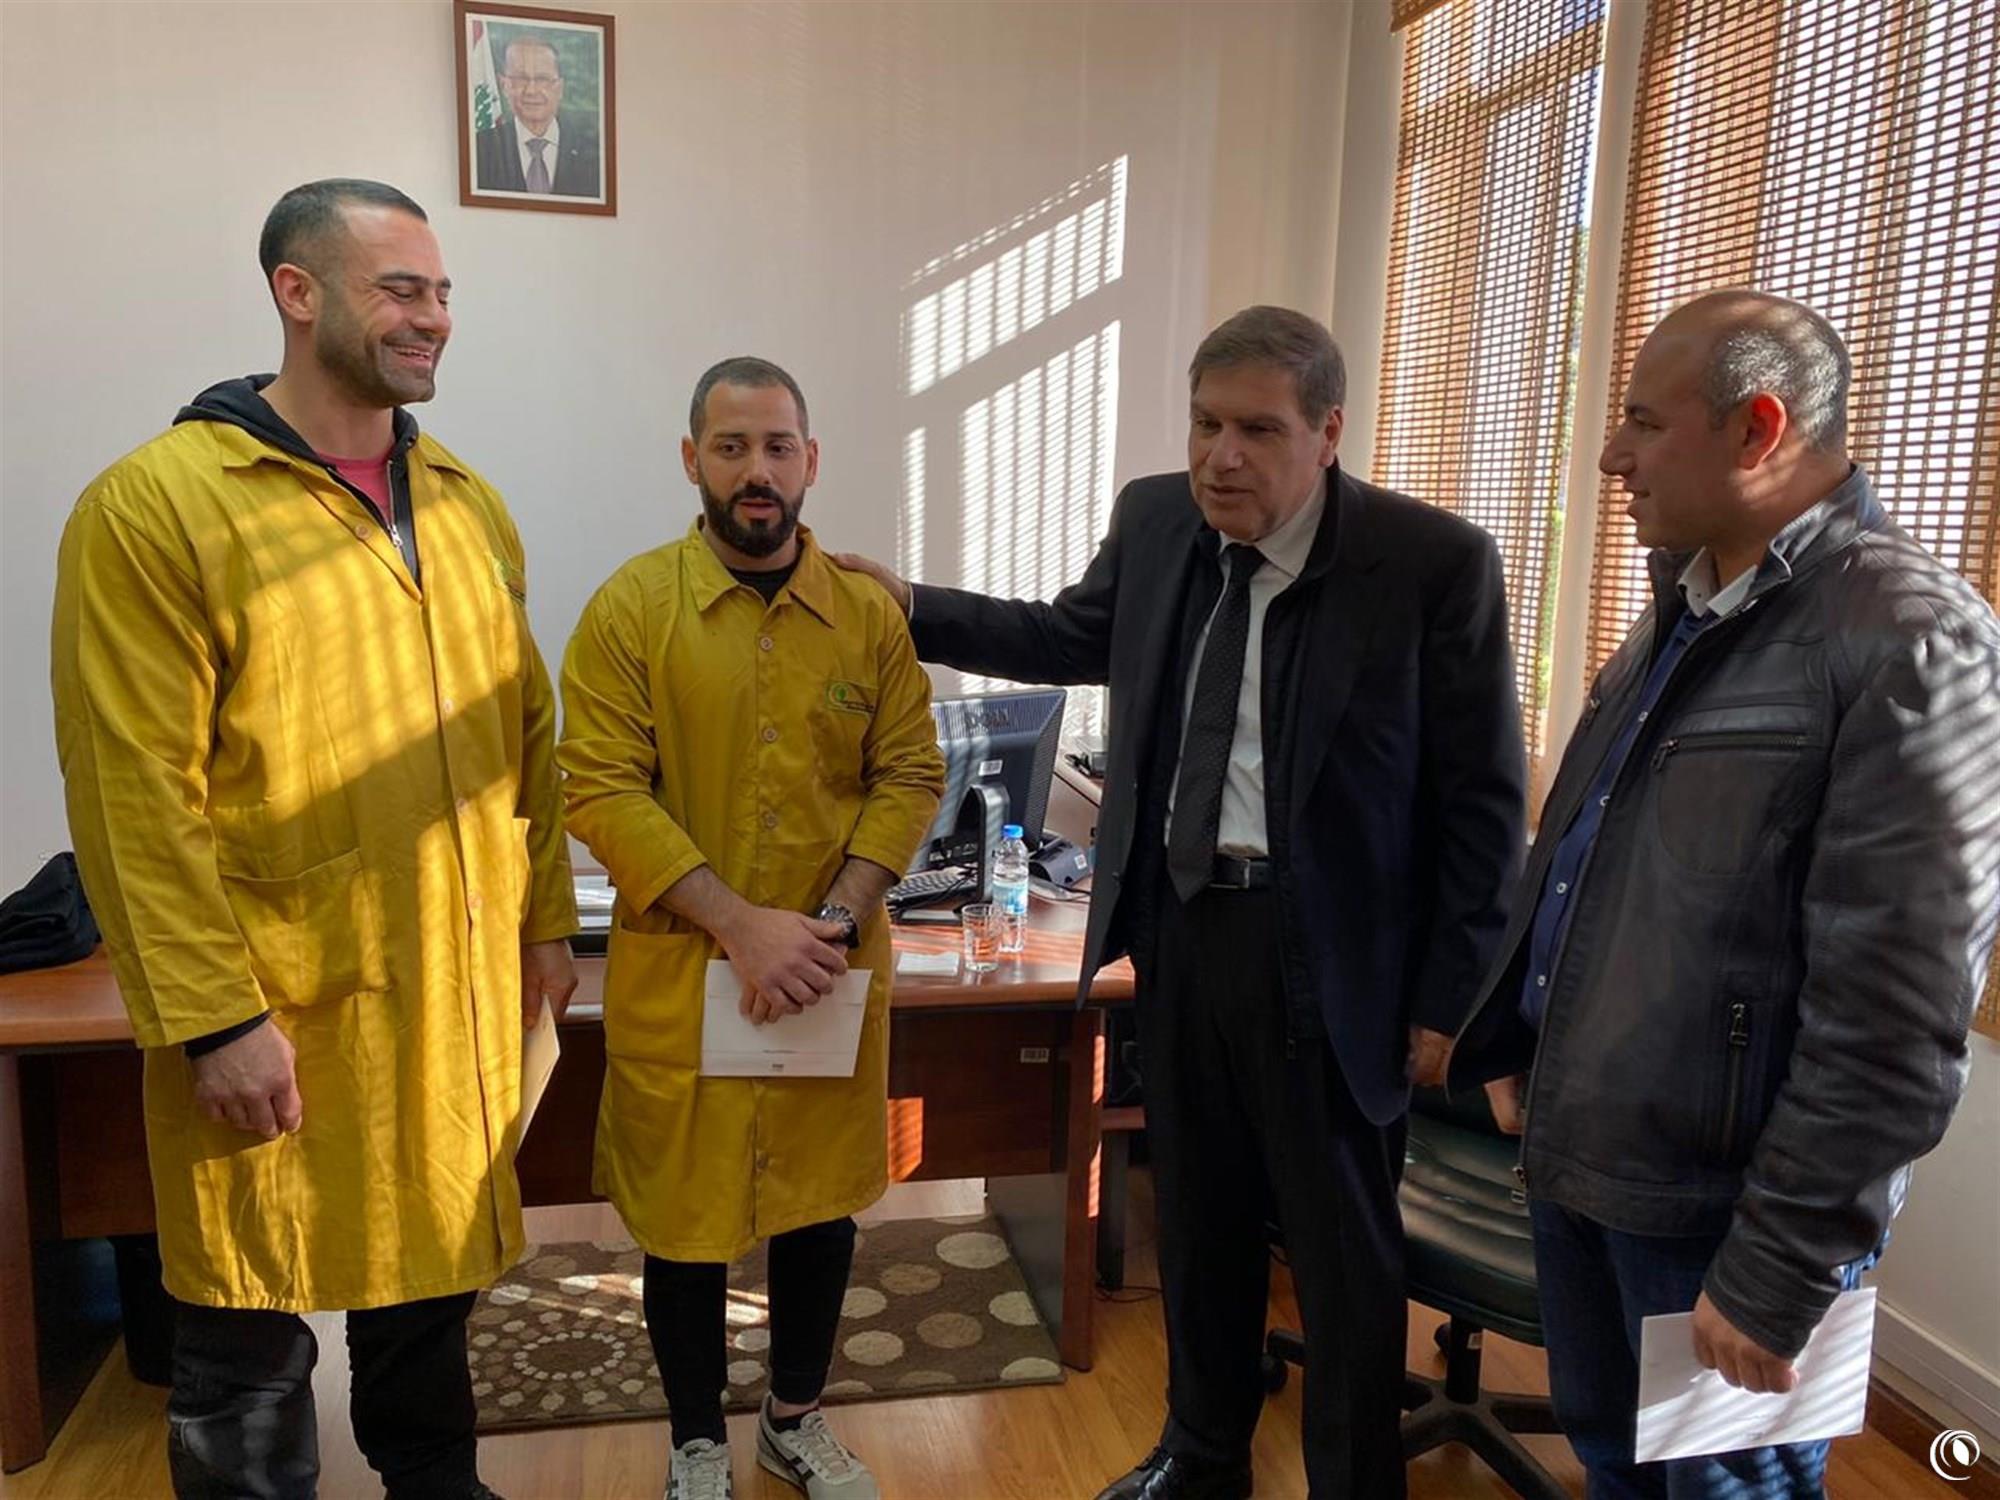 Eng. Seklaoui visits Regie Foundation in Batroun, passes on recommendations to experts